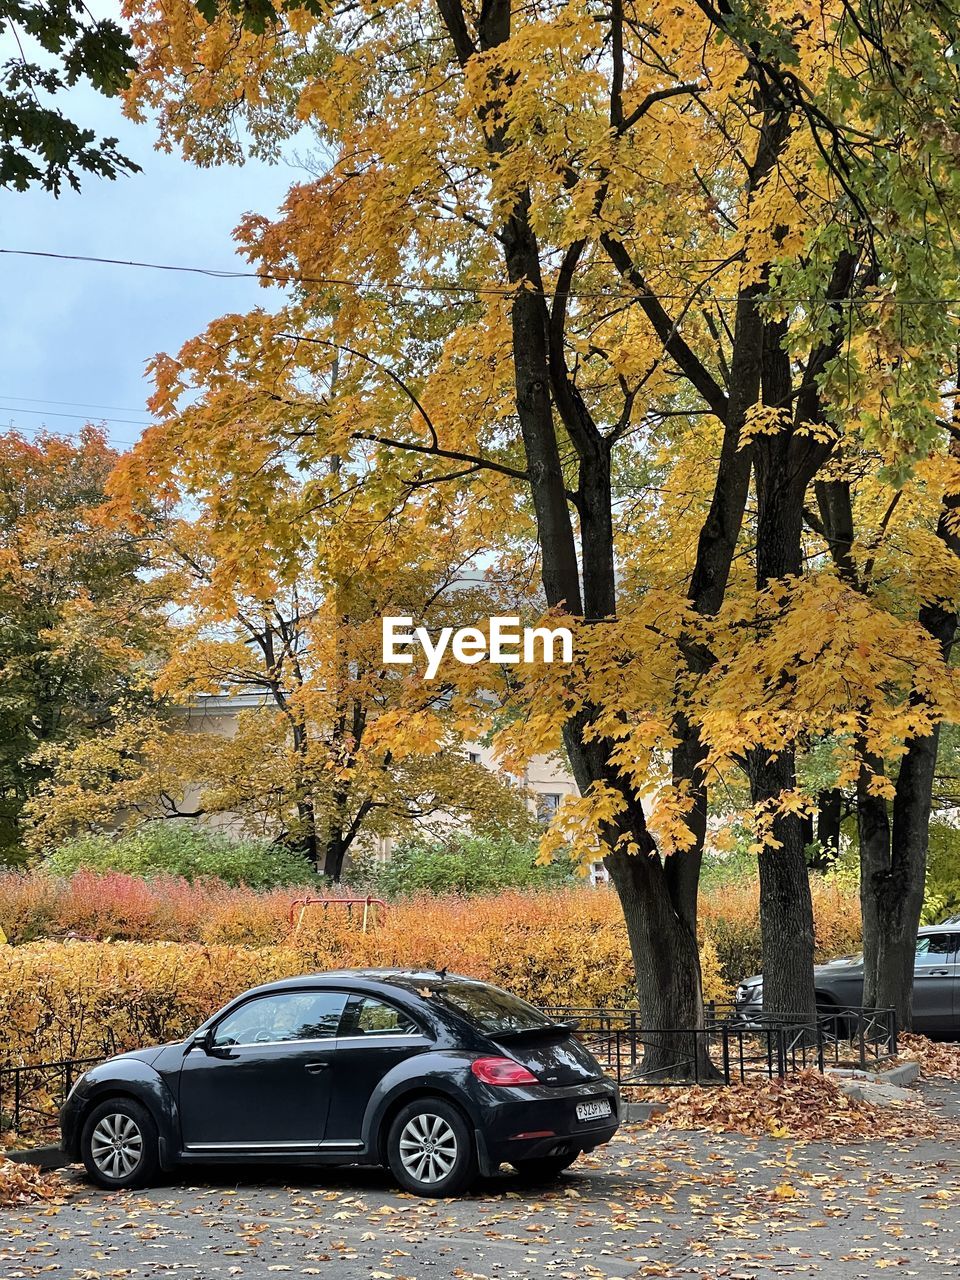 BICYCLE PARKED ON TREE DURING AUTUMN